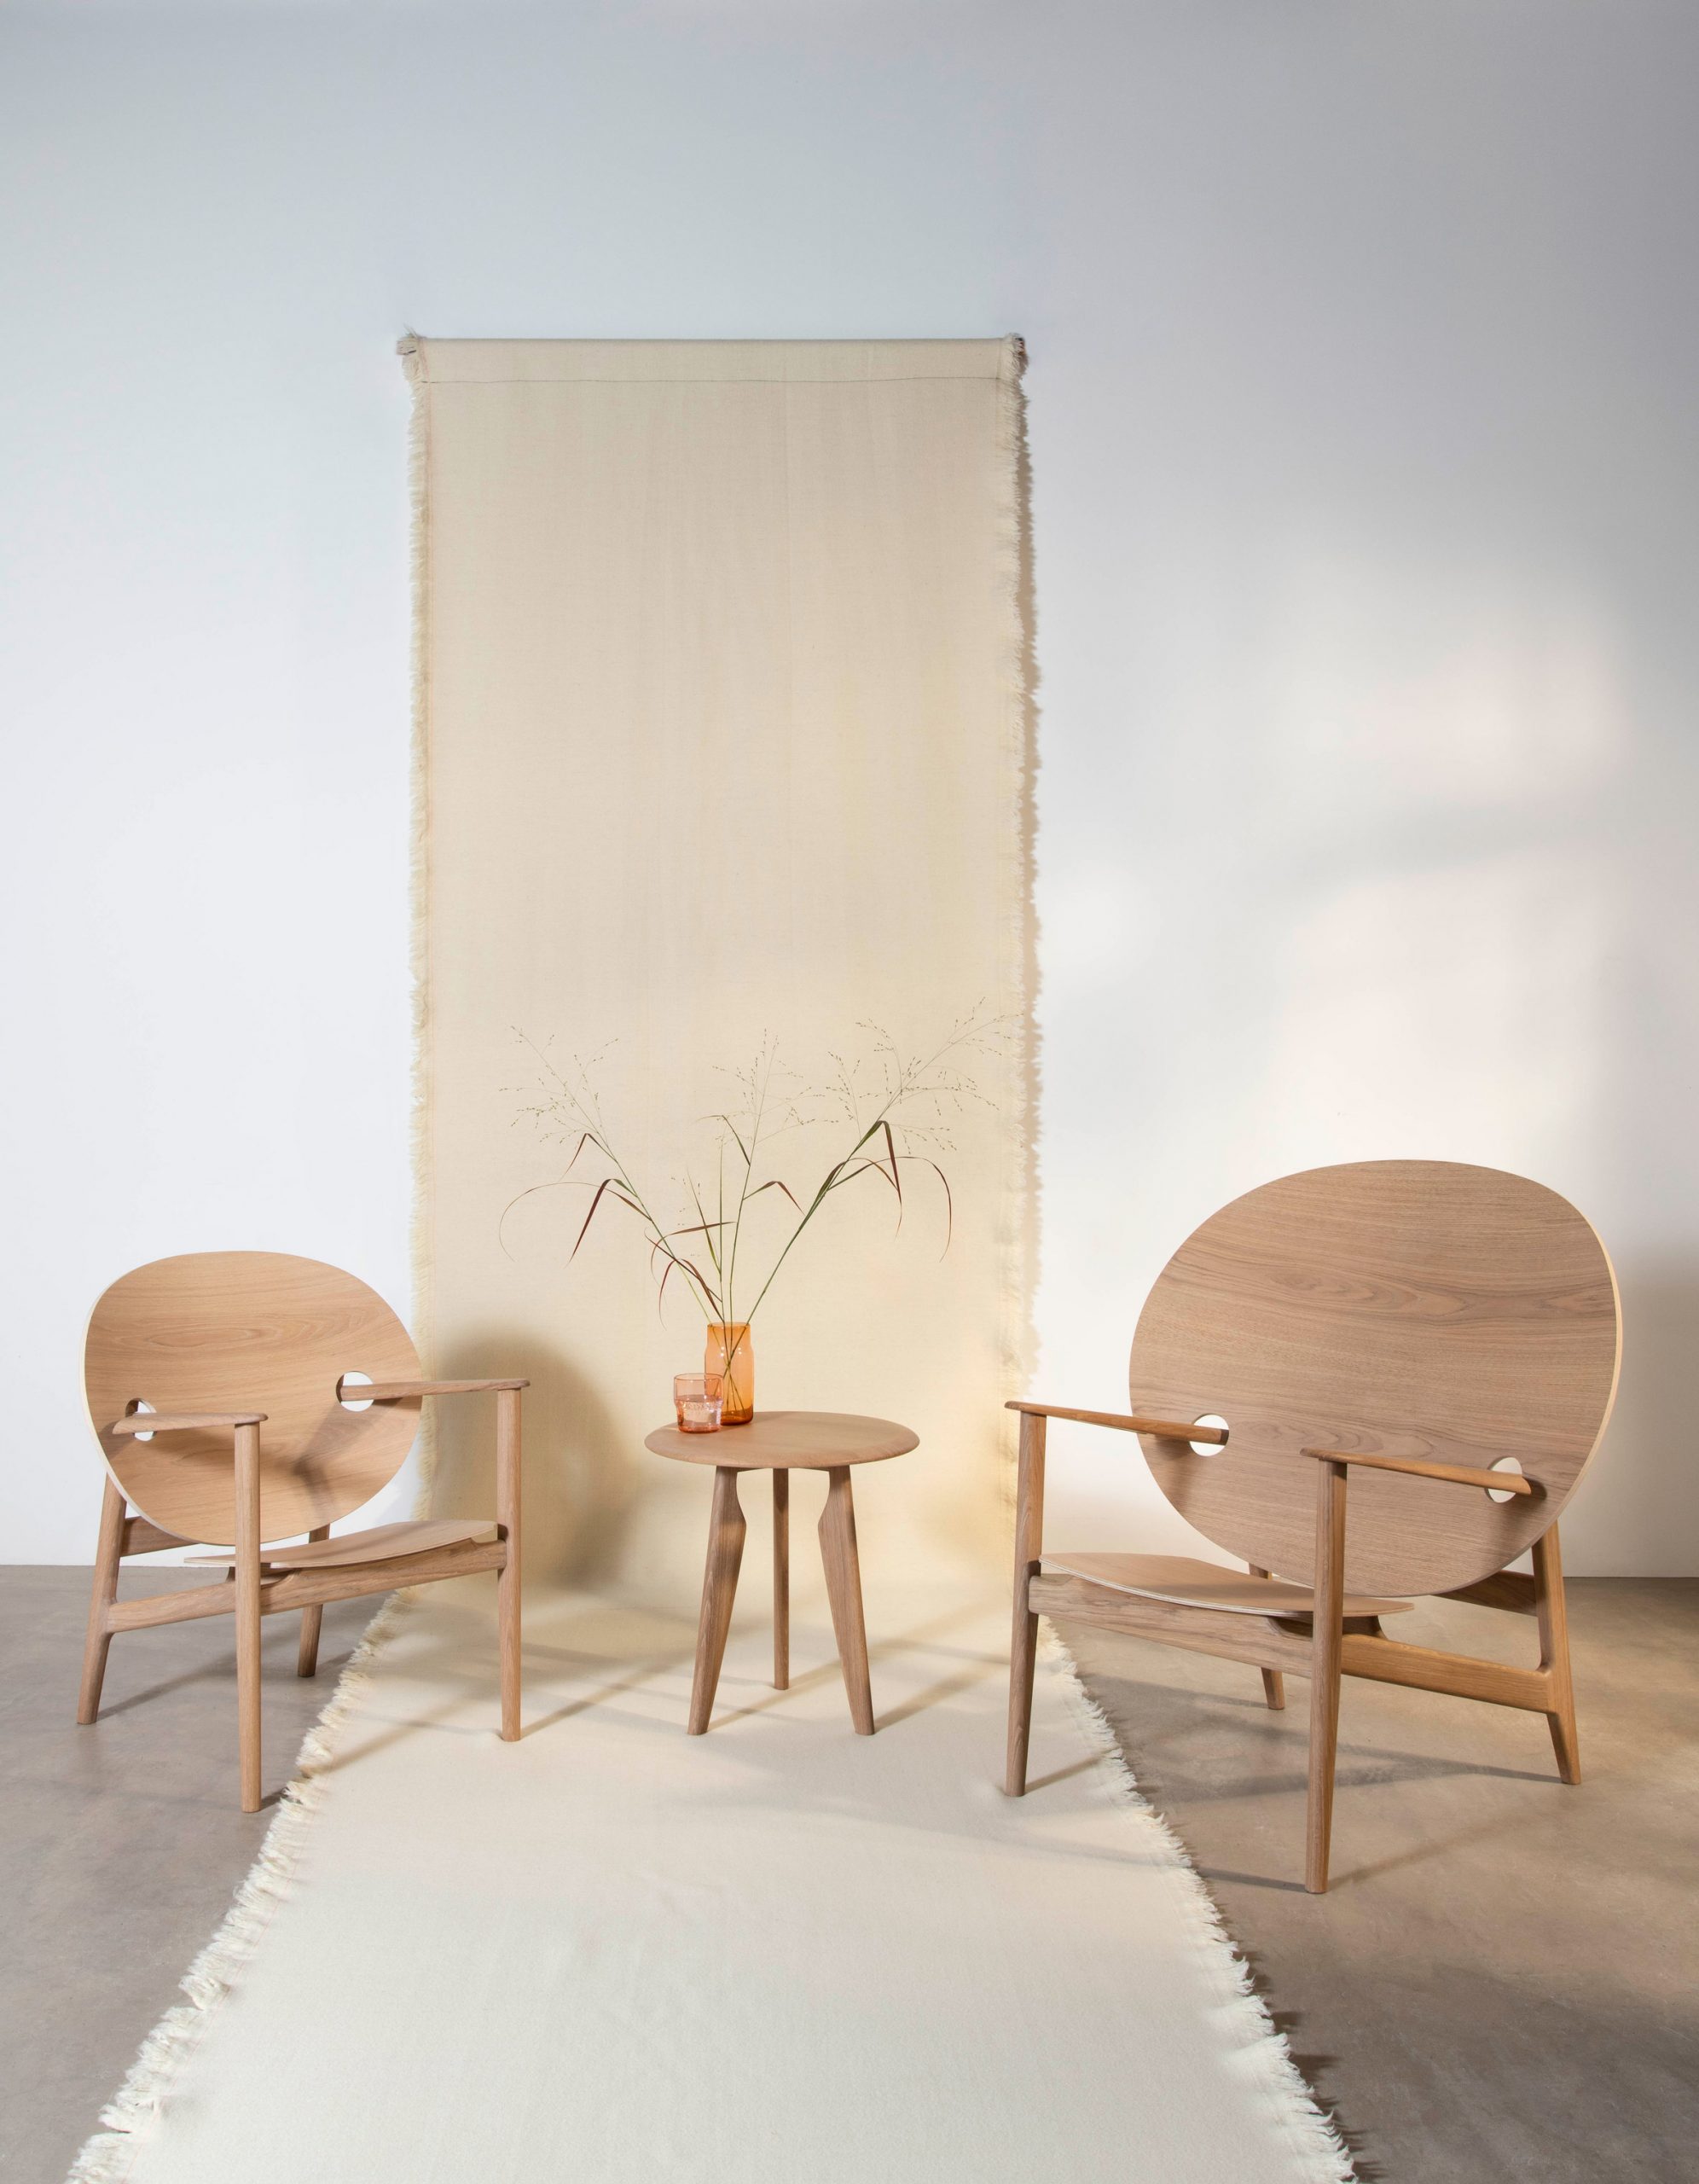 Mac Collins' Iklwa chairs and table in white oil